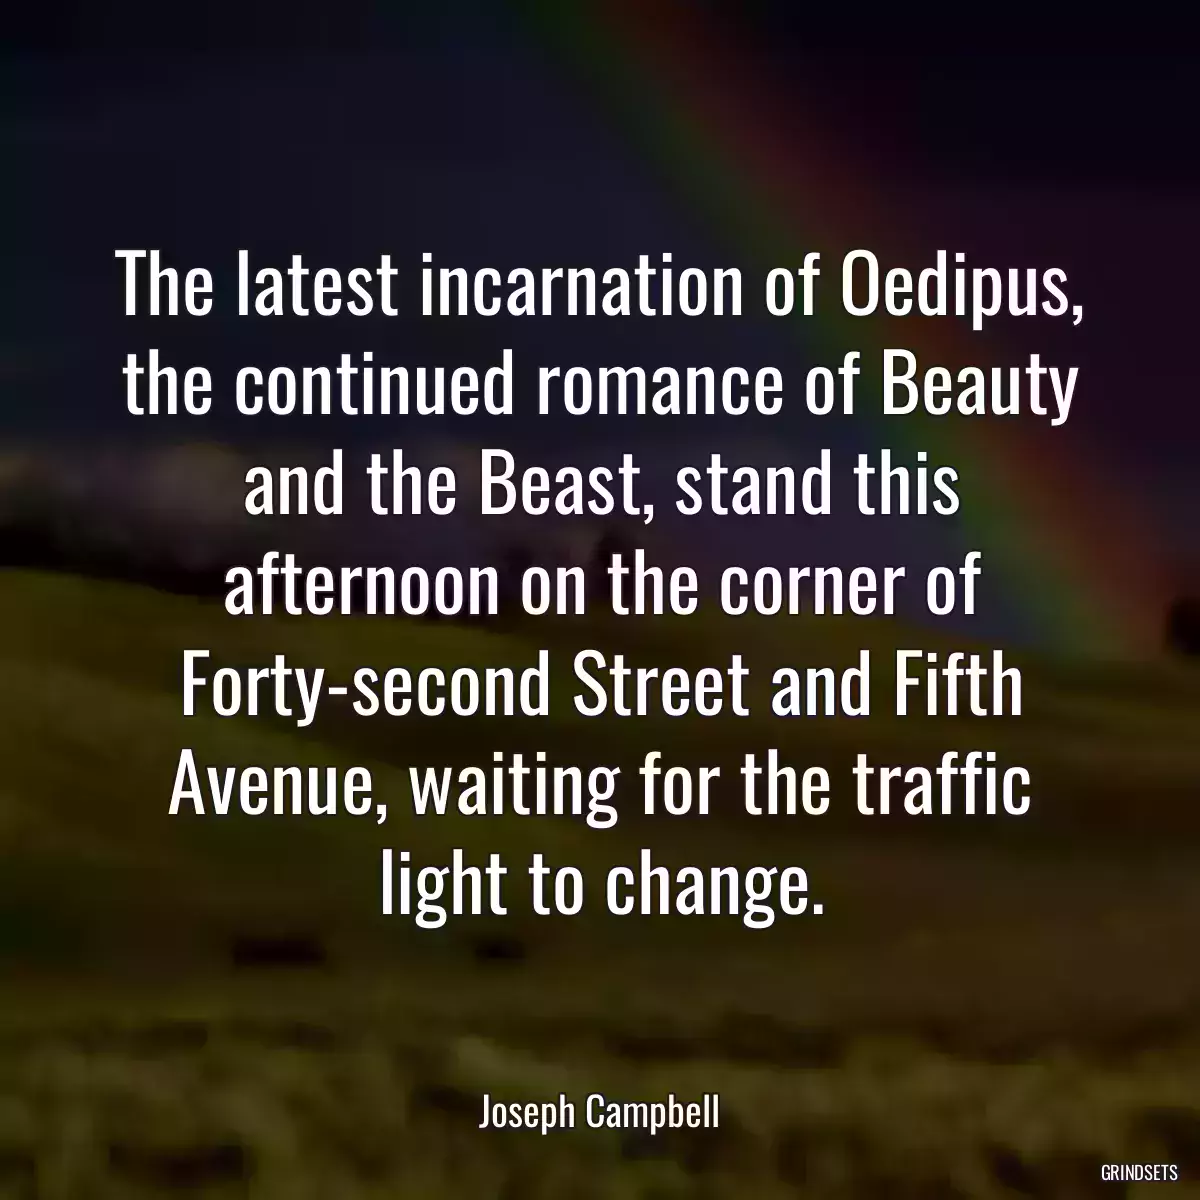 The latest incarnation of Oedipus, the continued romance of Beauty and the Beast, stand this afternoon on the corner of Forty-second Street and Fifth Avenue, waiting for the traffic light to change.